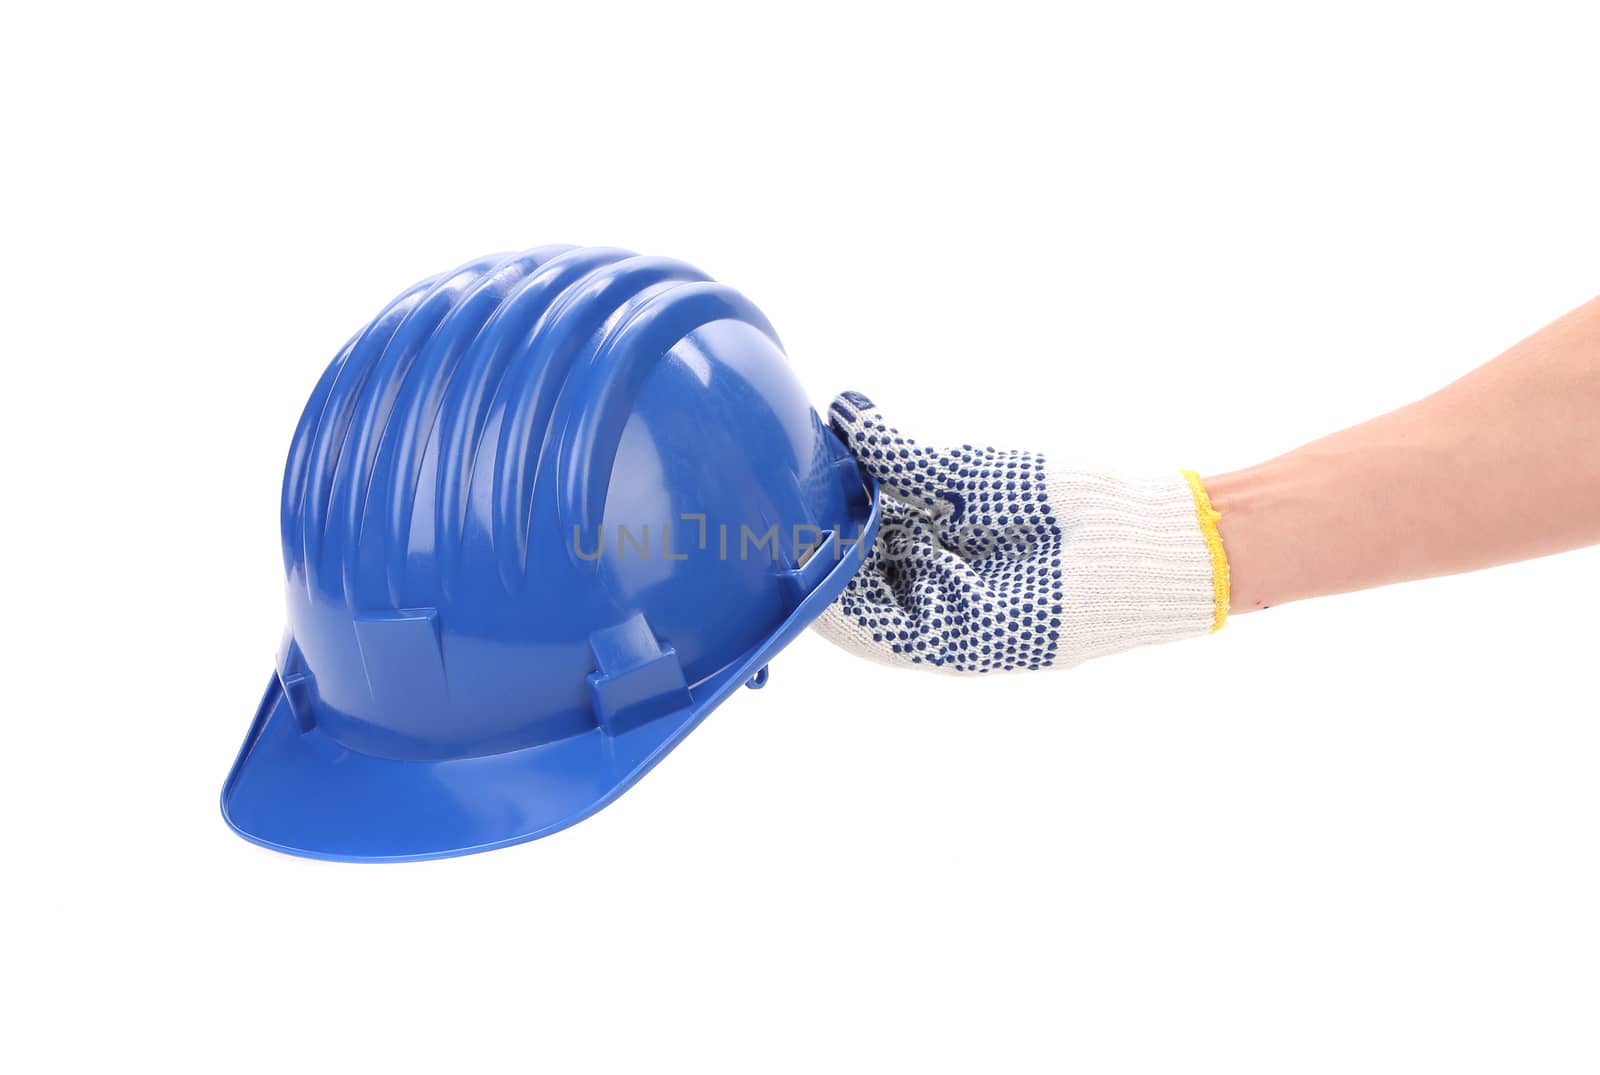 Hand holding blue helmet. Isolated on a white background.